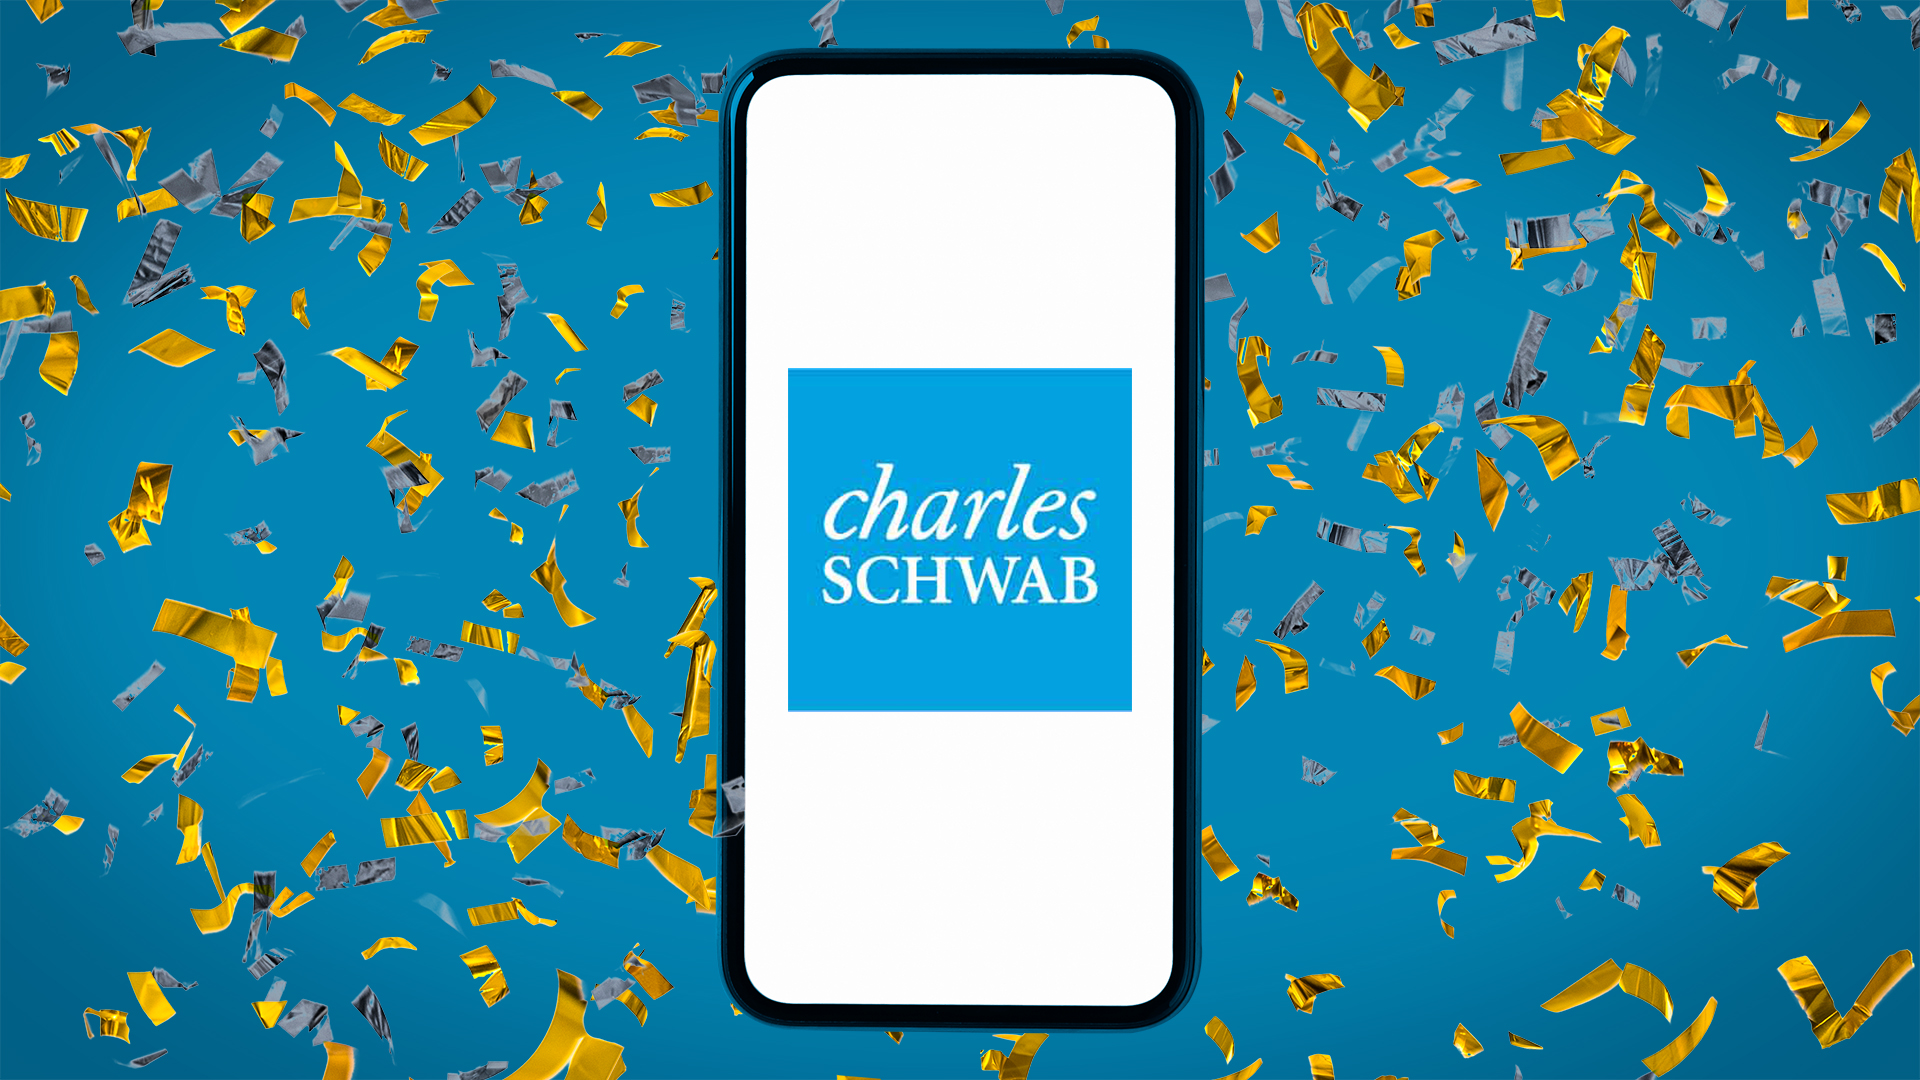 Charles Schwab Trade Cryptocurrency - How Will Charles Schwab S Bullish S P 500 Prediction Impact Bitcoin : There is a dedicated online learning centre, local workshops, seminars however, they do not have the popular metatrader platform nor do they offer forex, cfd or cryptocurrency trading.